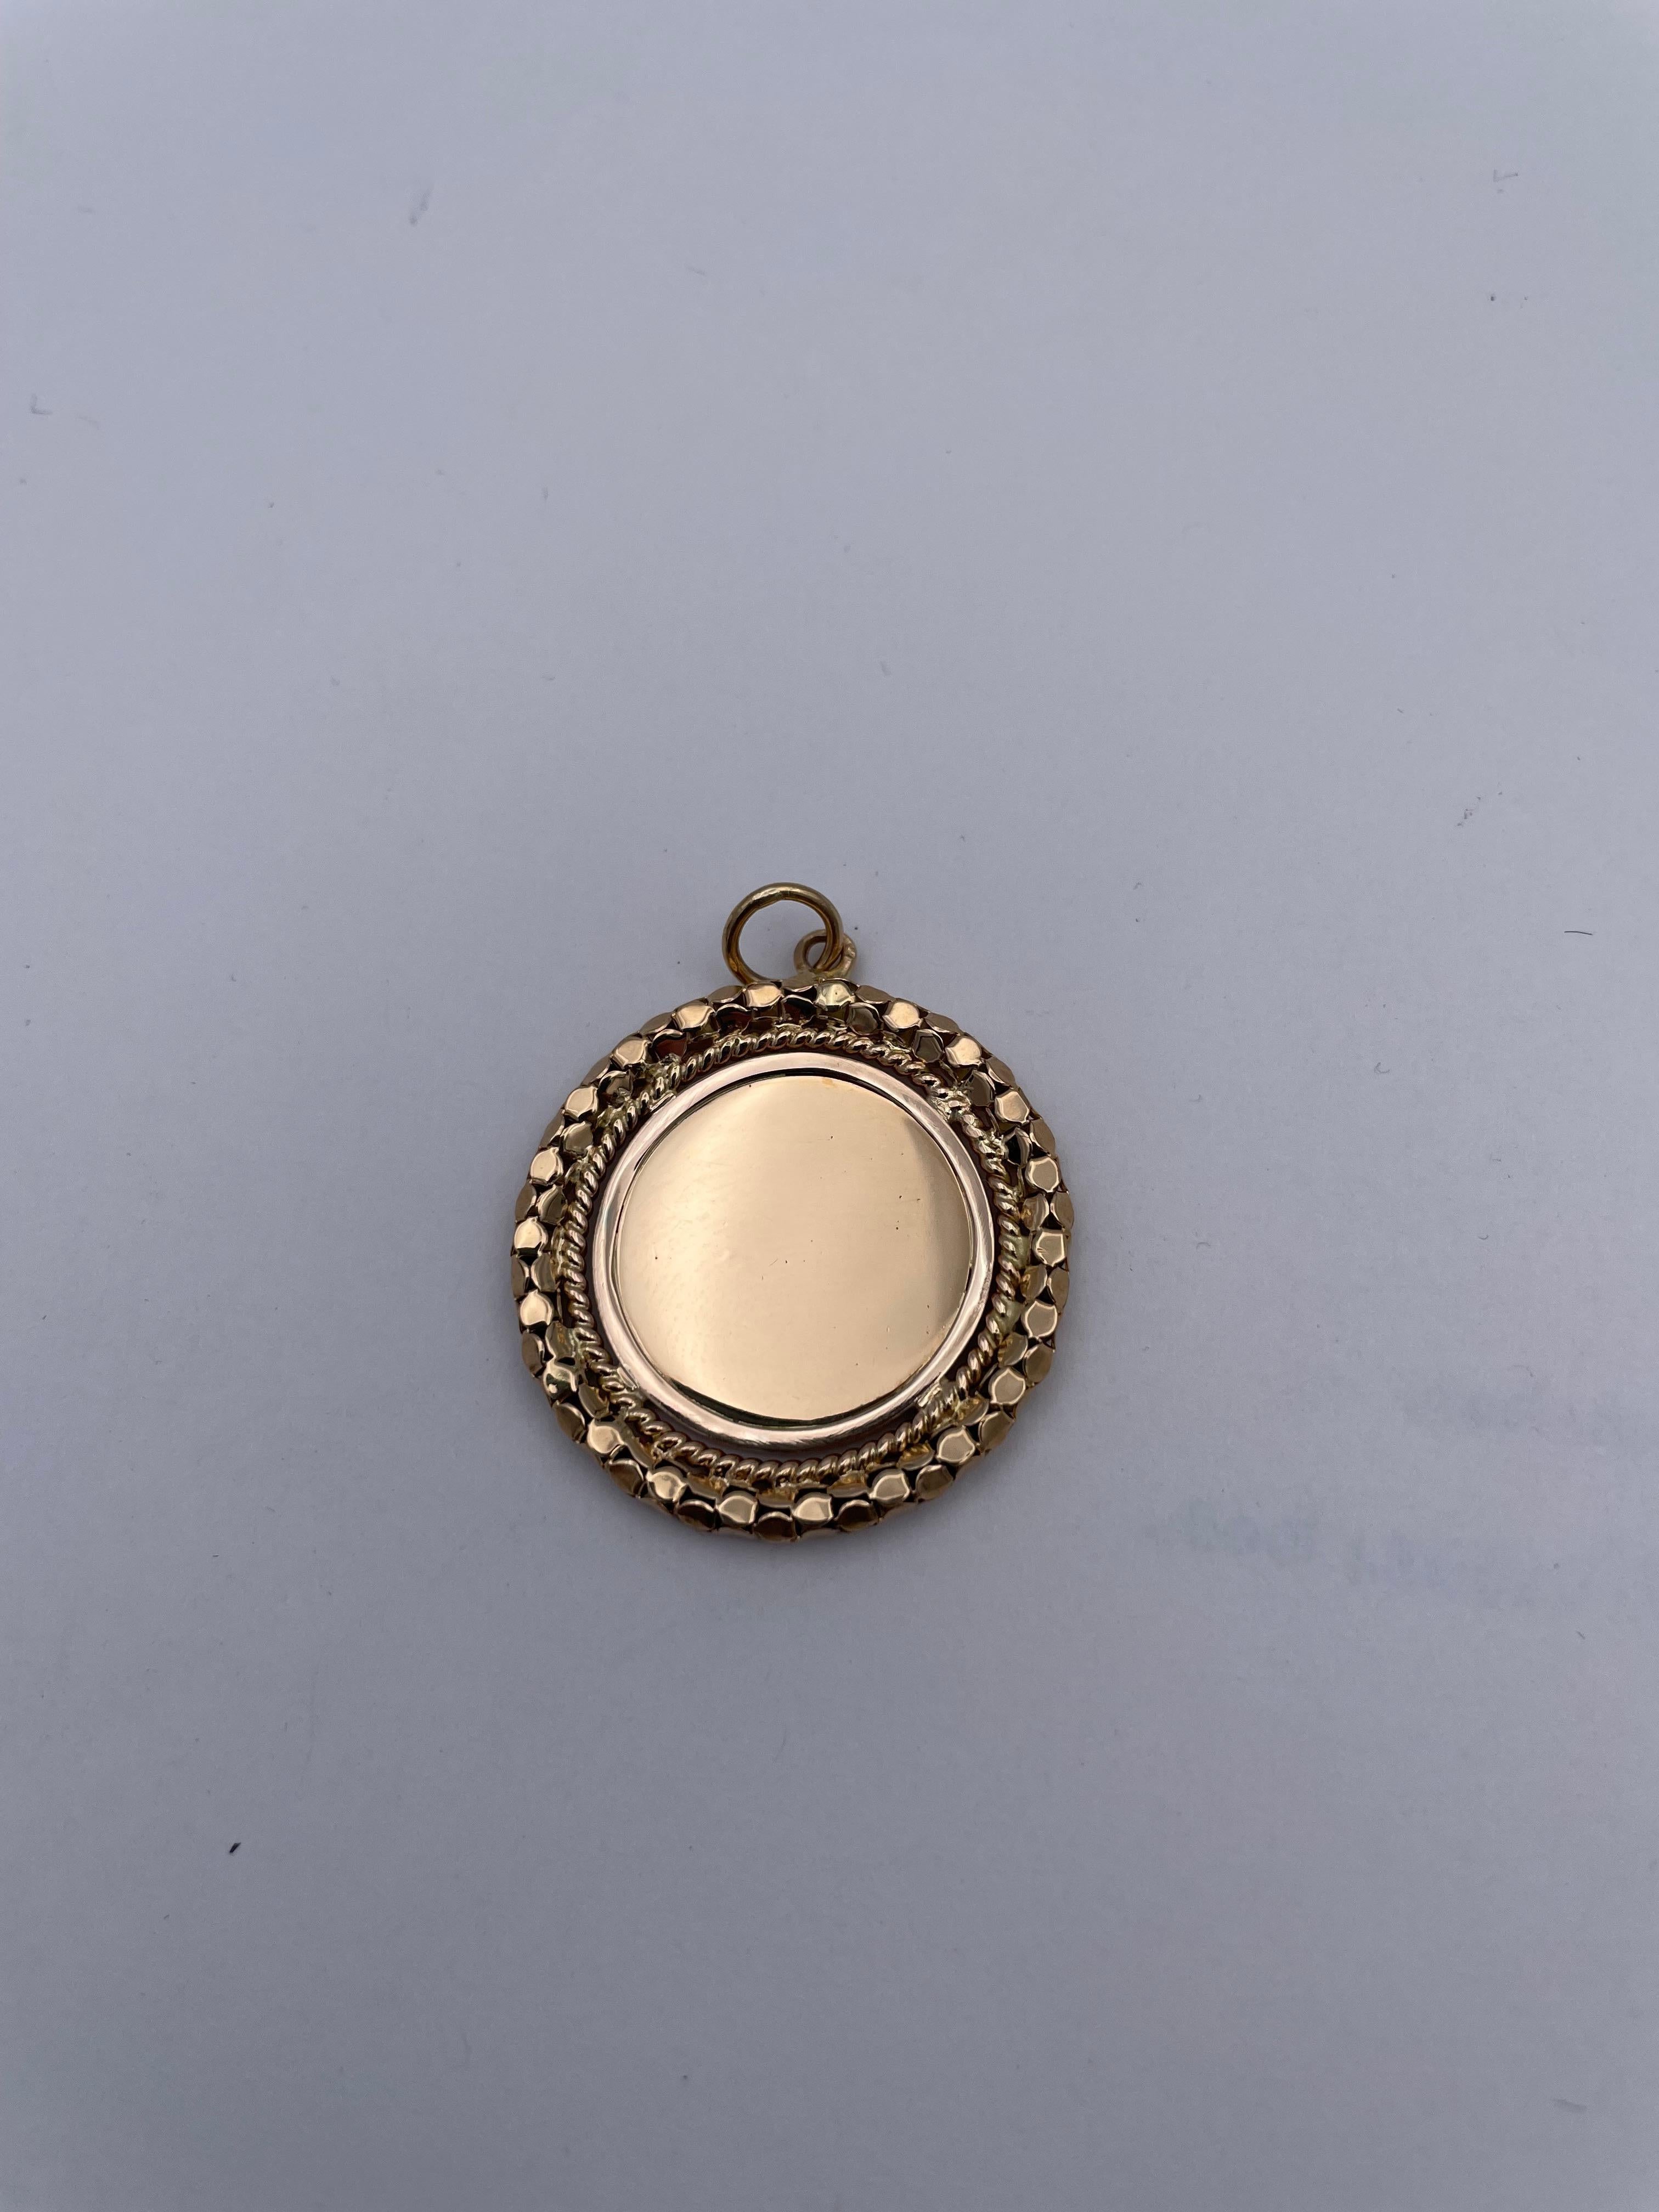 Large 18K yellow gold disc.  Shiny gold center, with a double embossed border, front and back.  Suitable for hand engraving a name or monogram and a personal message. Can be use as a pendant or a charm. 1 1/4